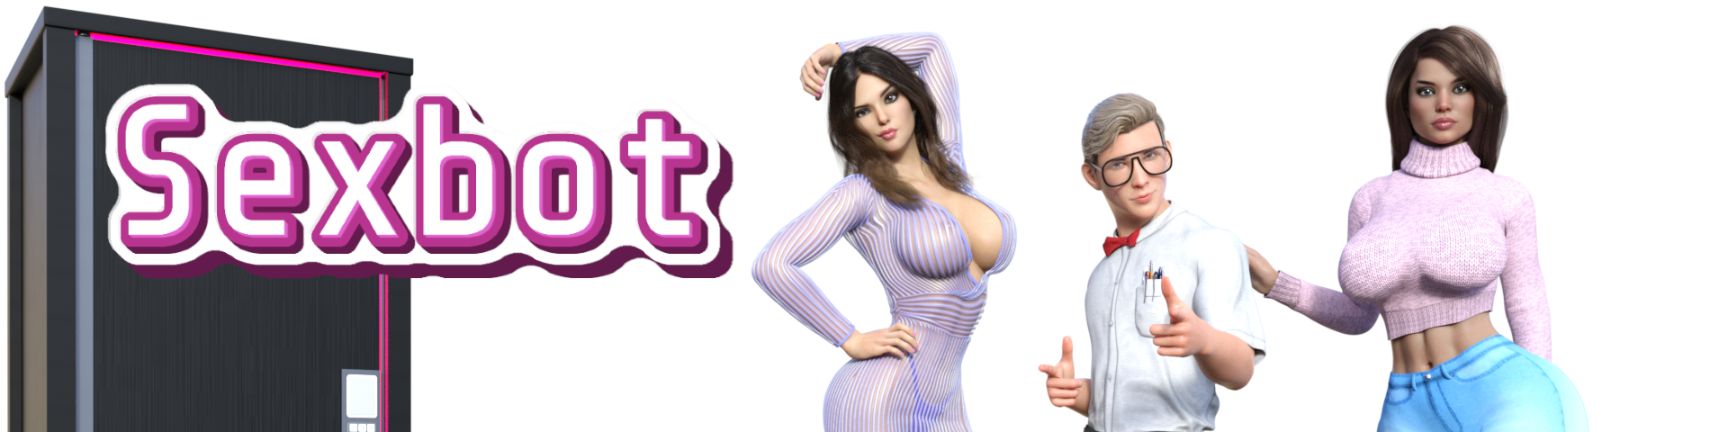 Sexbot Apk Android Download (13)